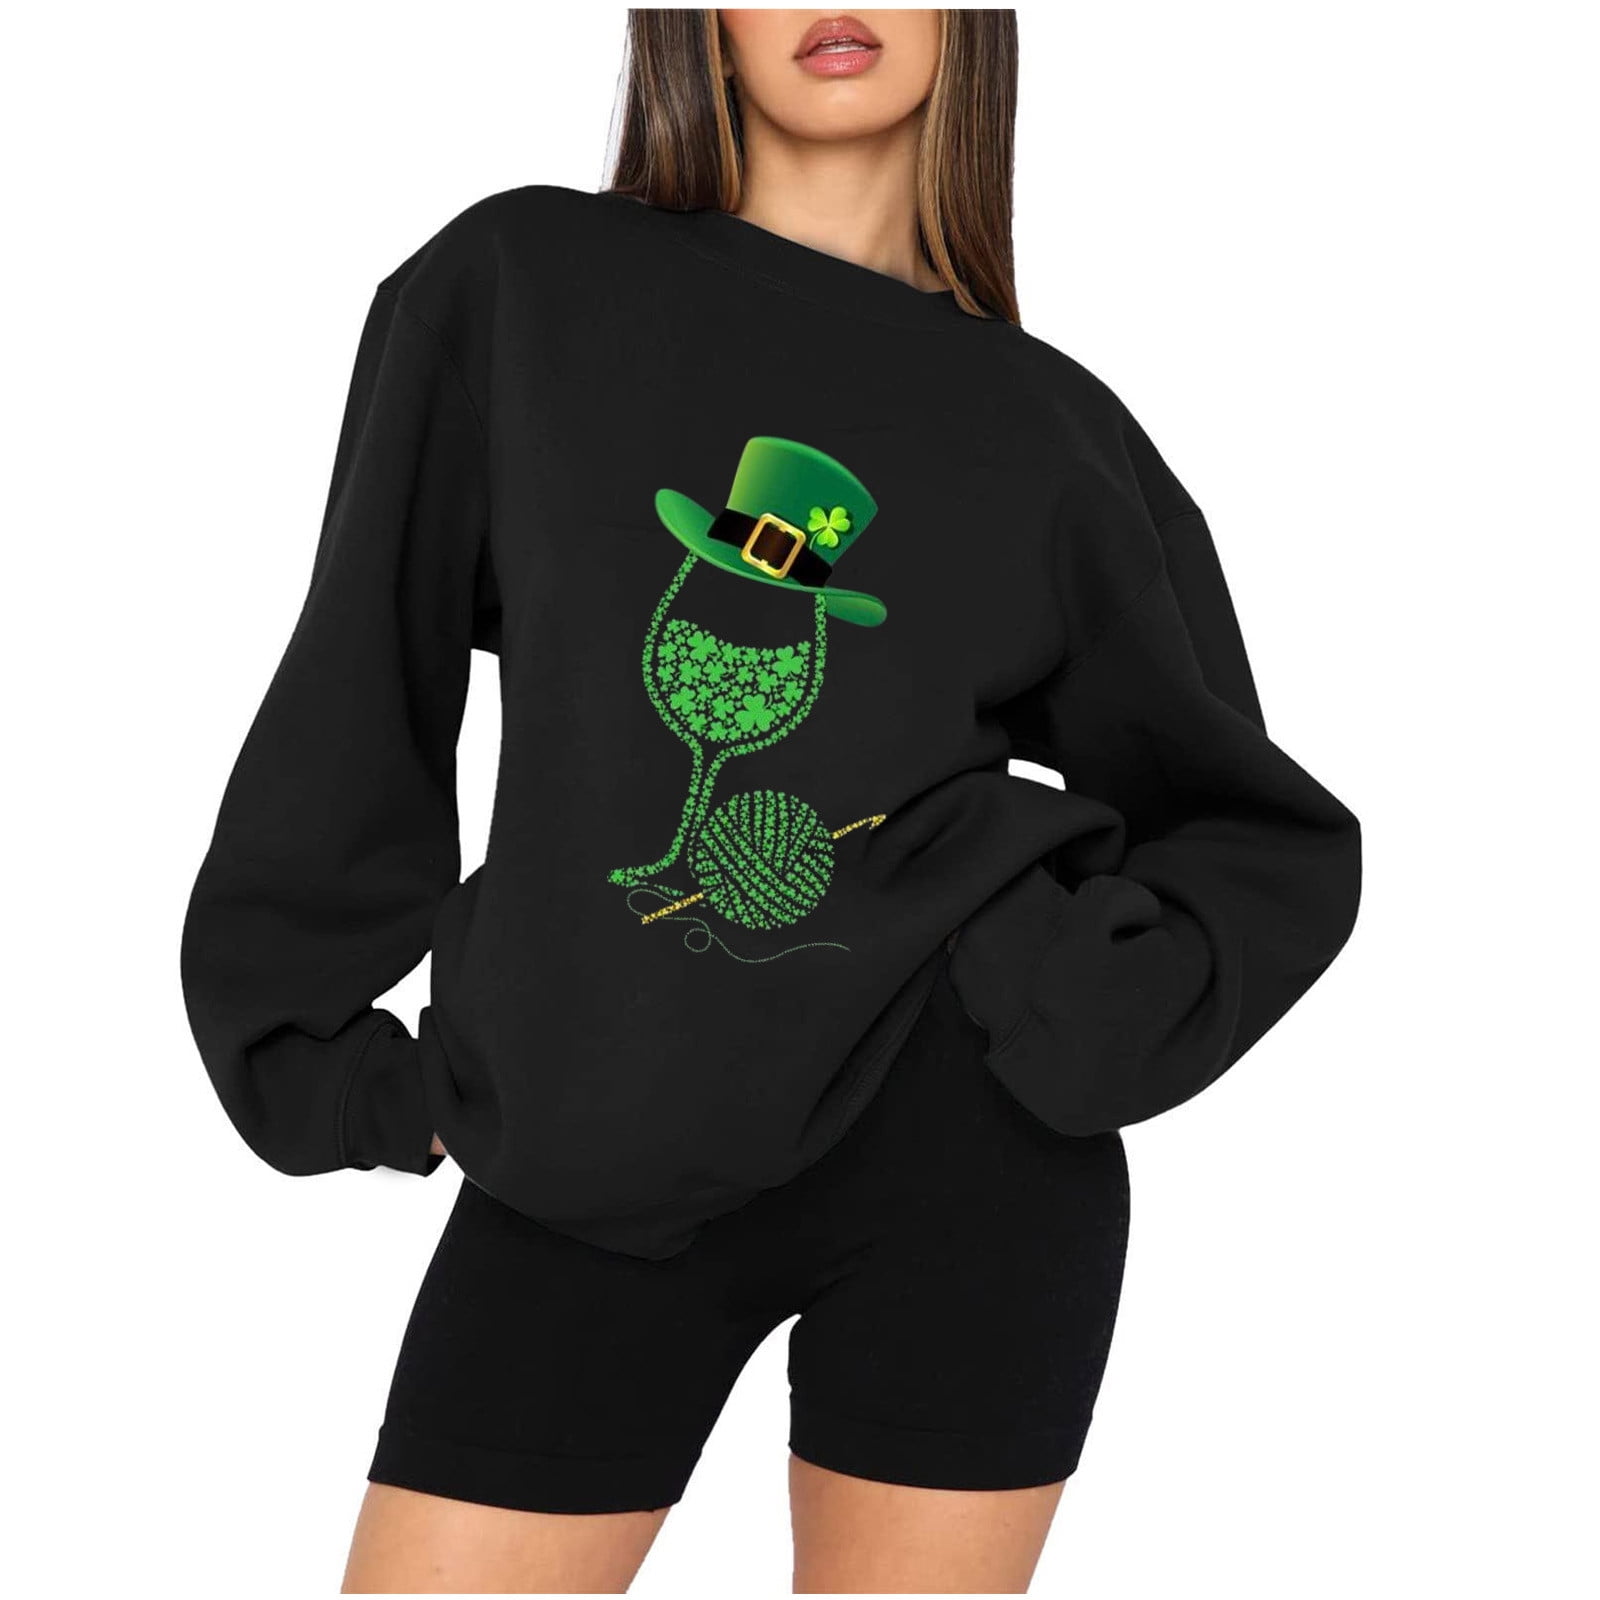  IEPOFG Fashion Woman Rounk Neck Short Sleeve T-Shirt Summer  St.Patrick's Day Printing Blouse Tops Loose Cute Graphic Tees : Sports &  Outdoors